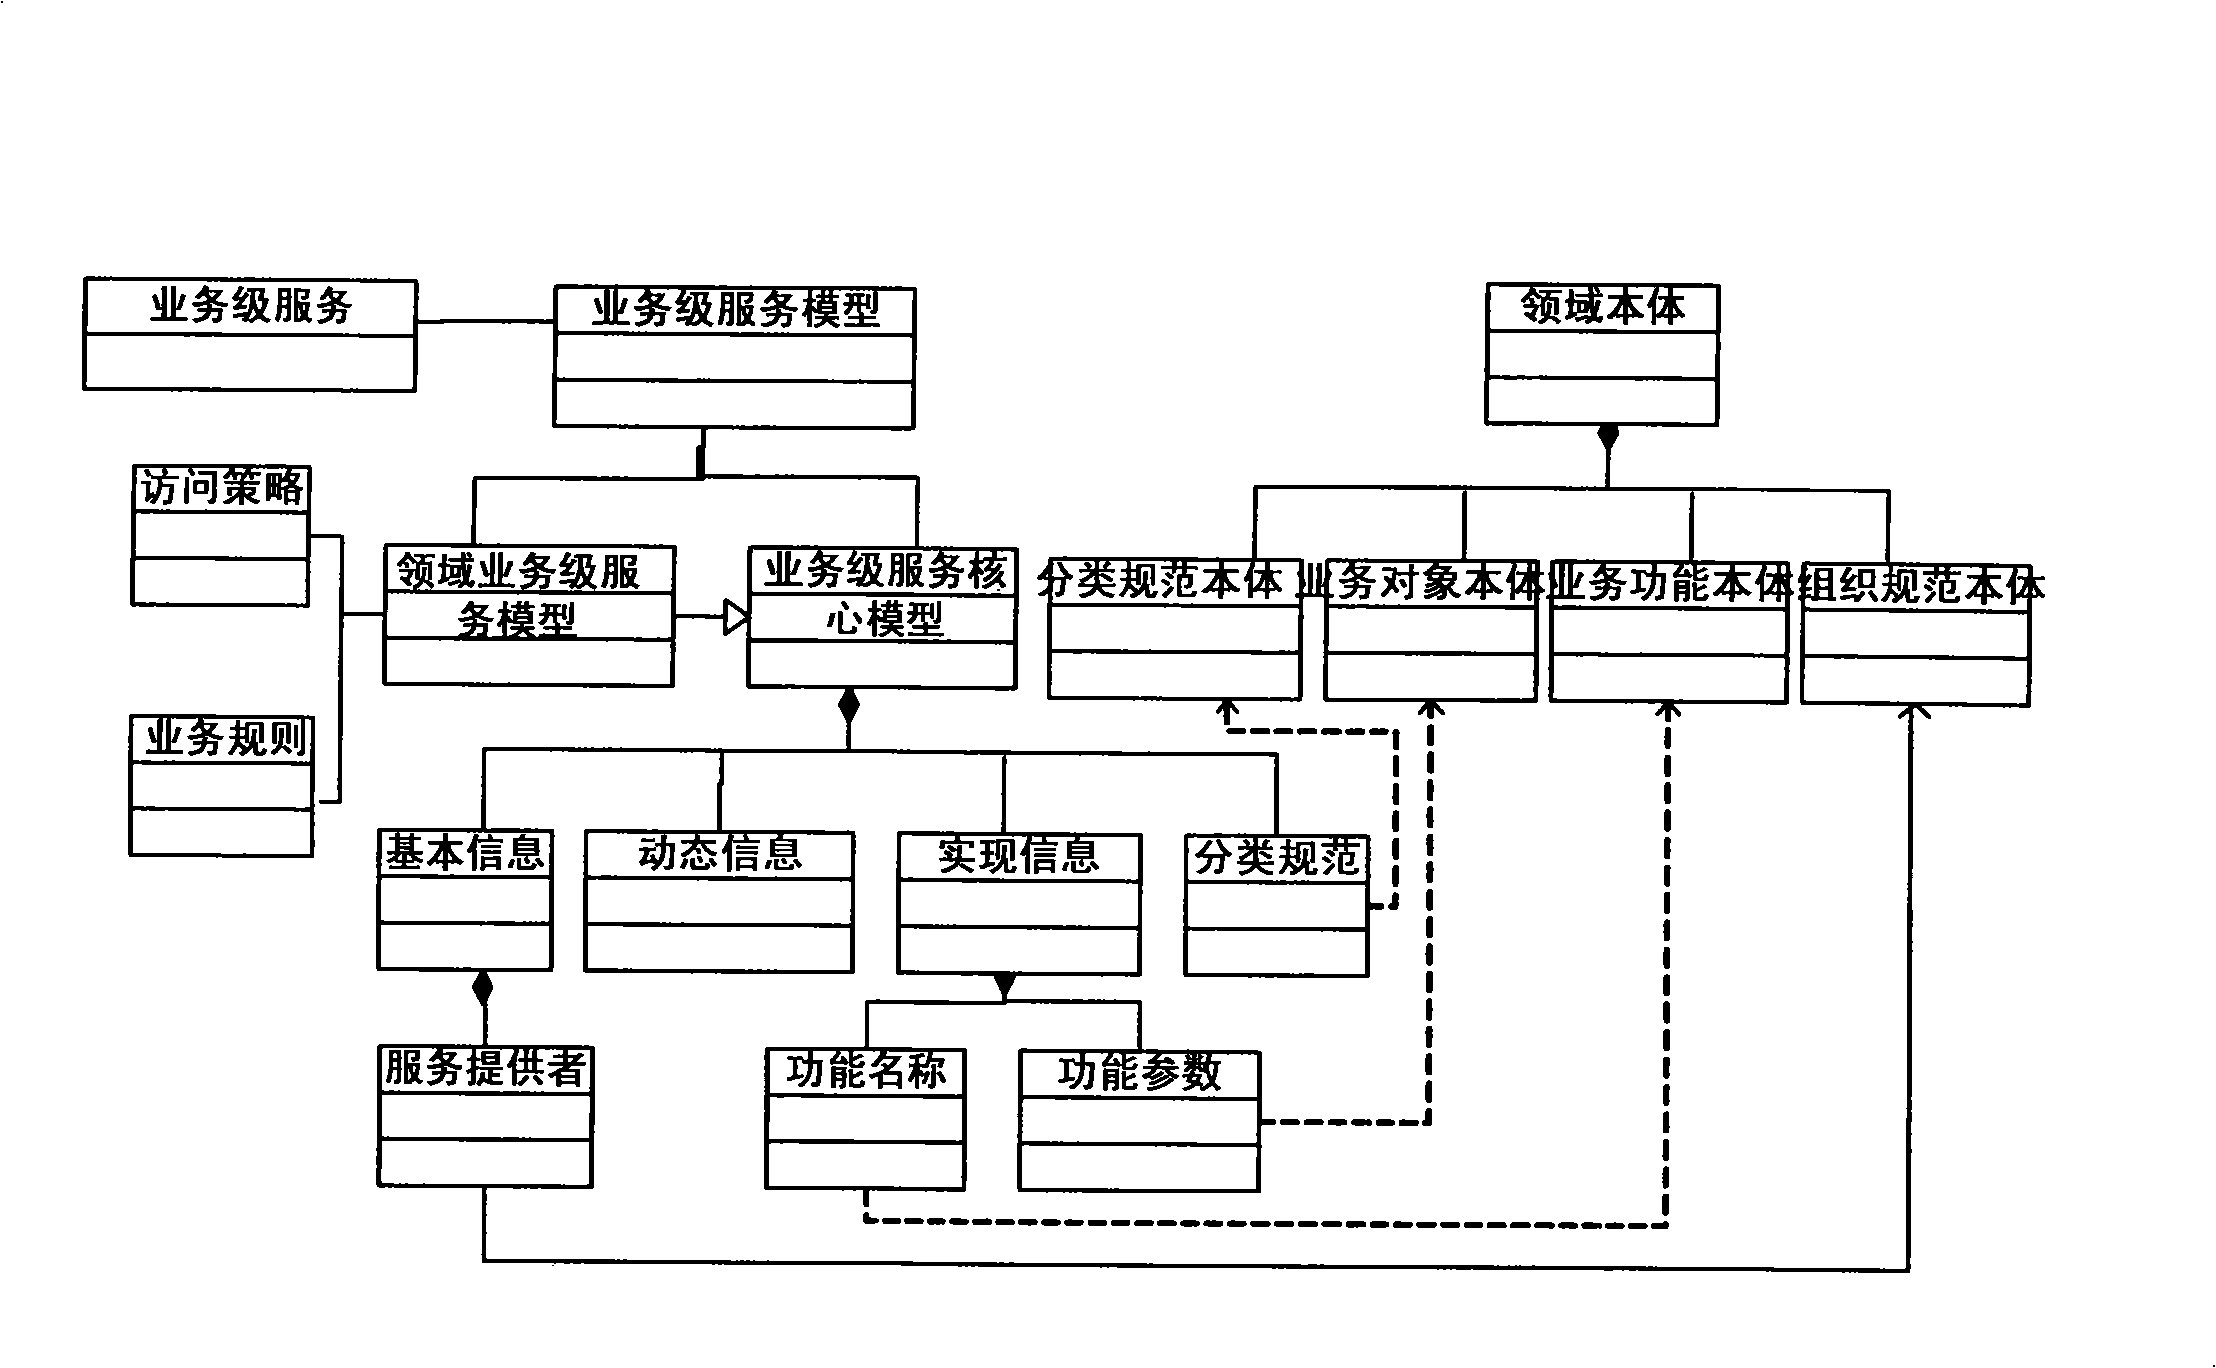 Business level method, apparatus and system for managing service information